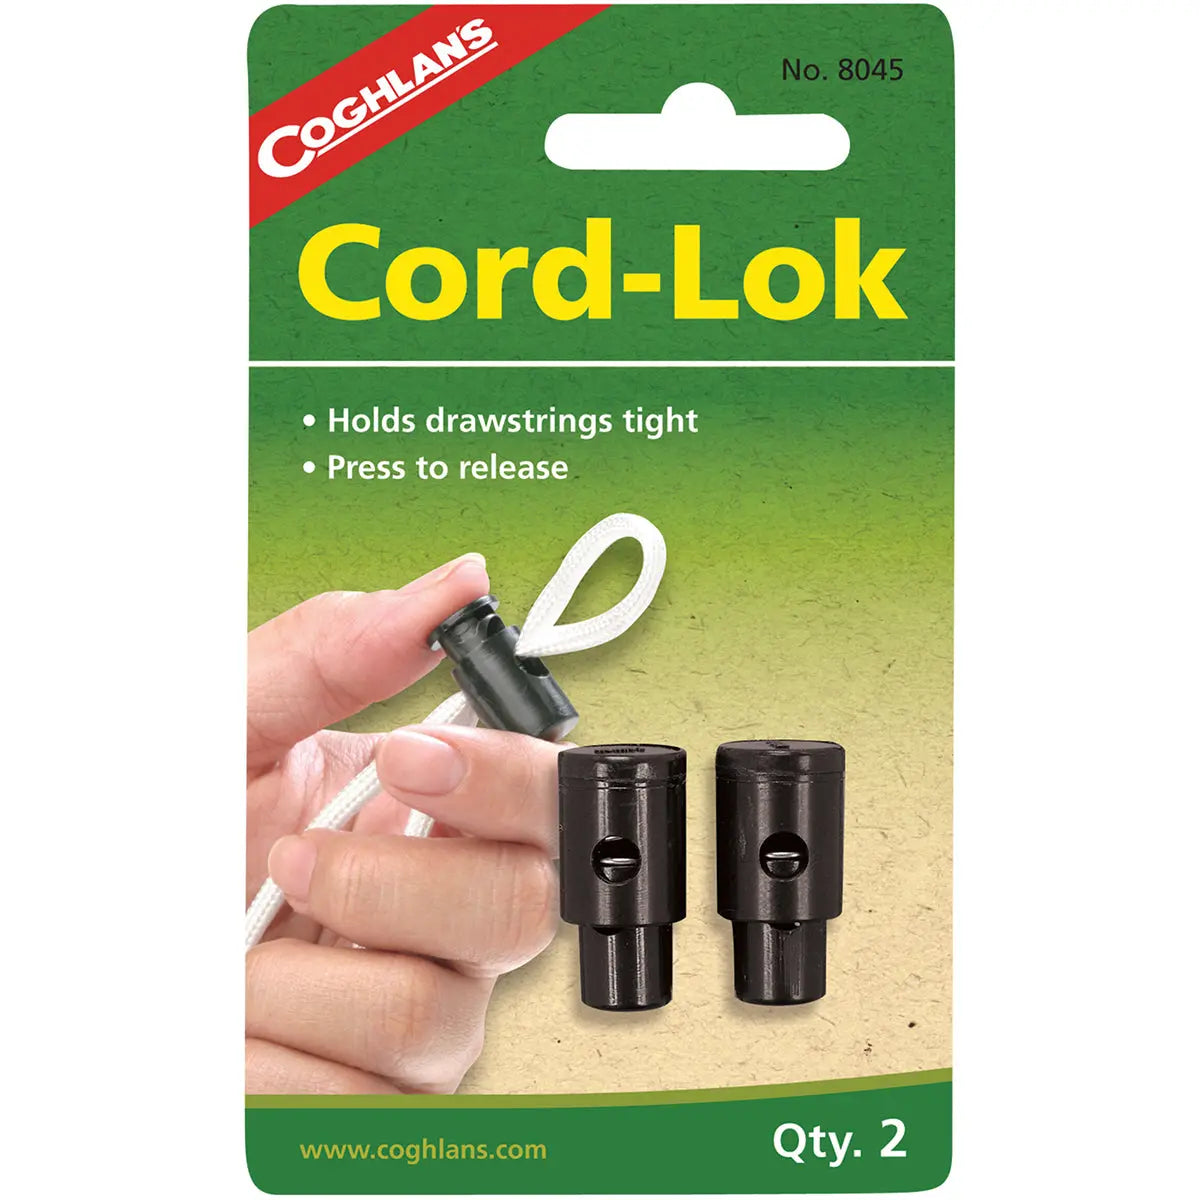 Coghlan's Cord-Lok (2 Pack), Holds Drawstrings Shoestrings Tight, Quick-Release Coghlan's